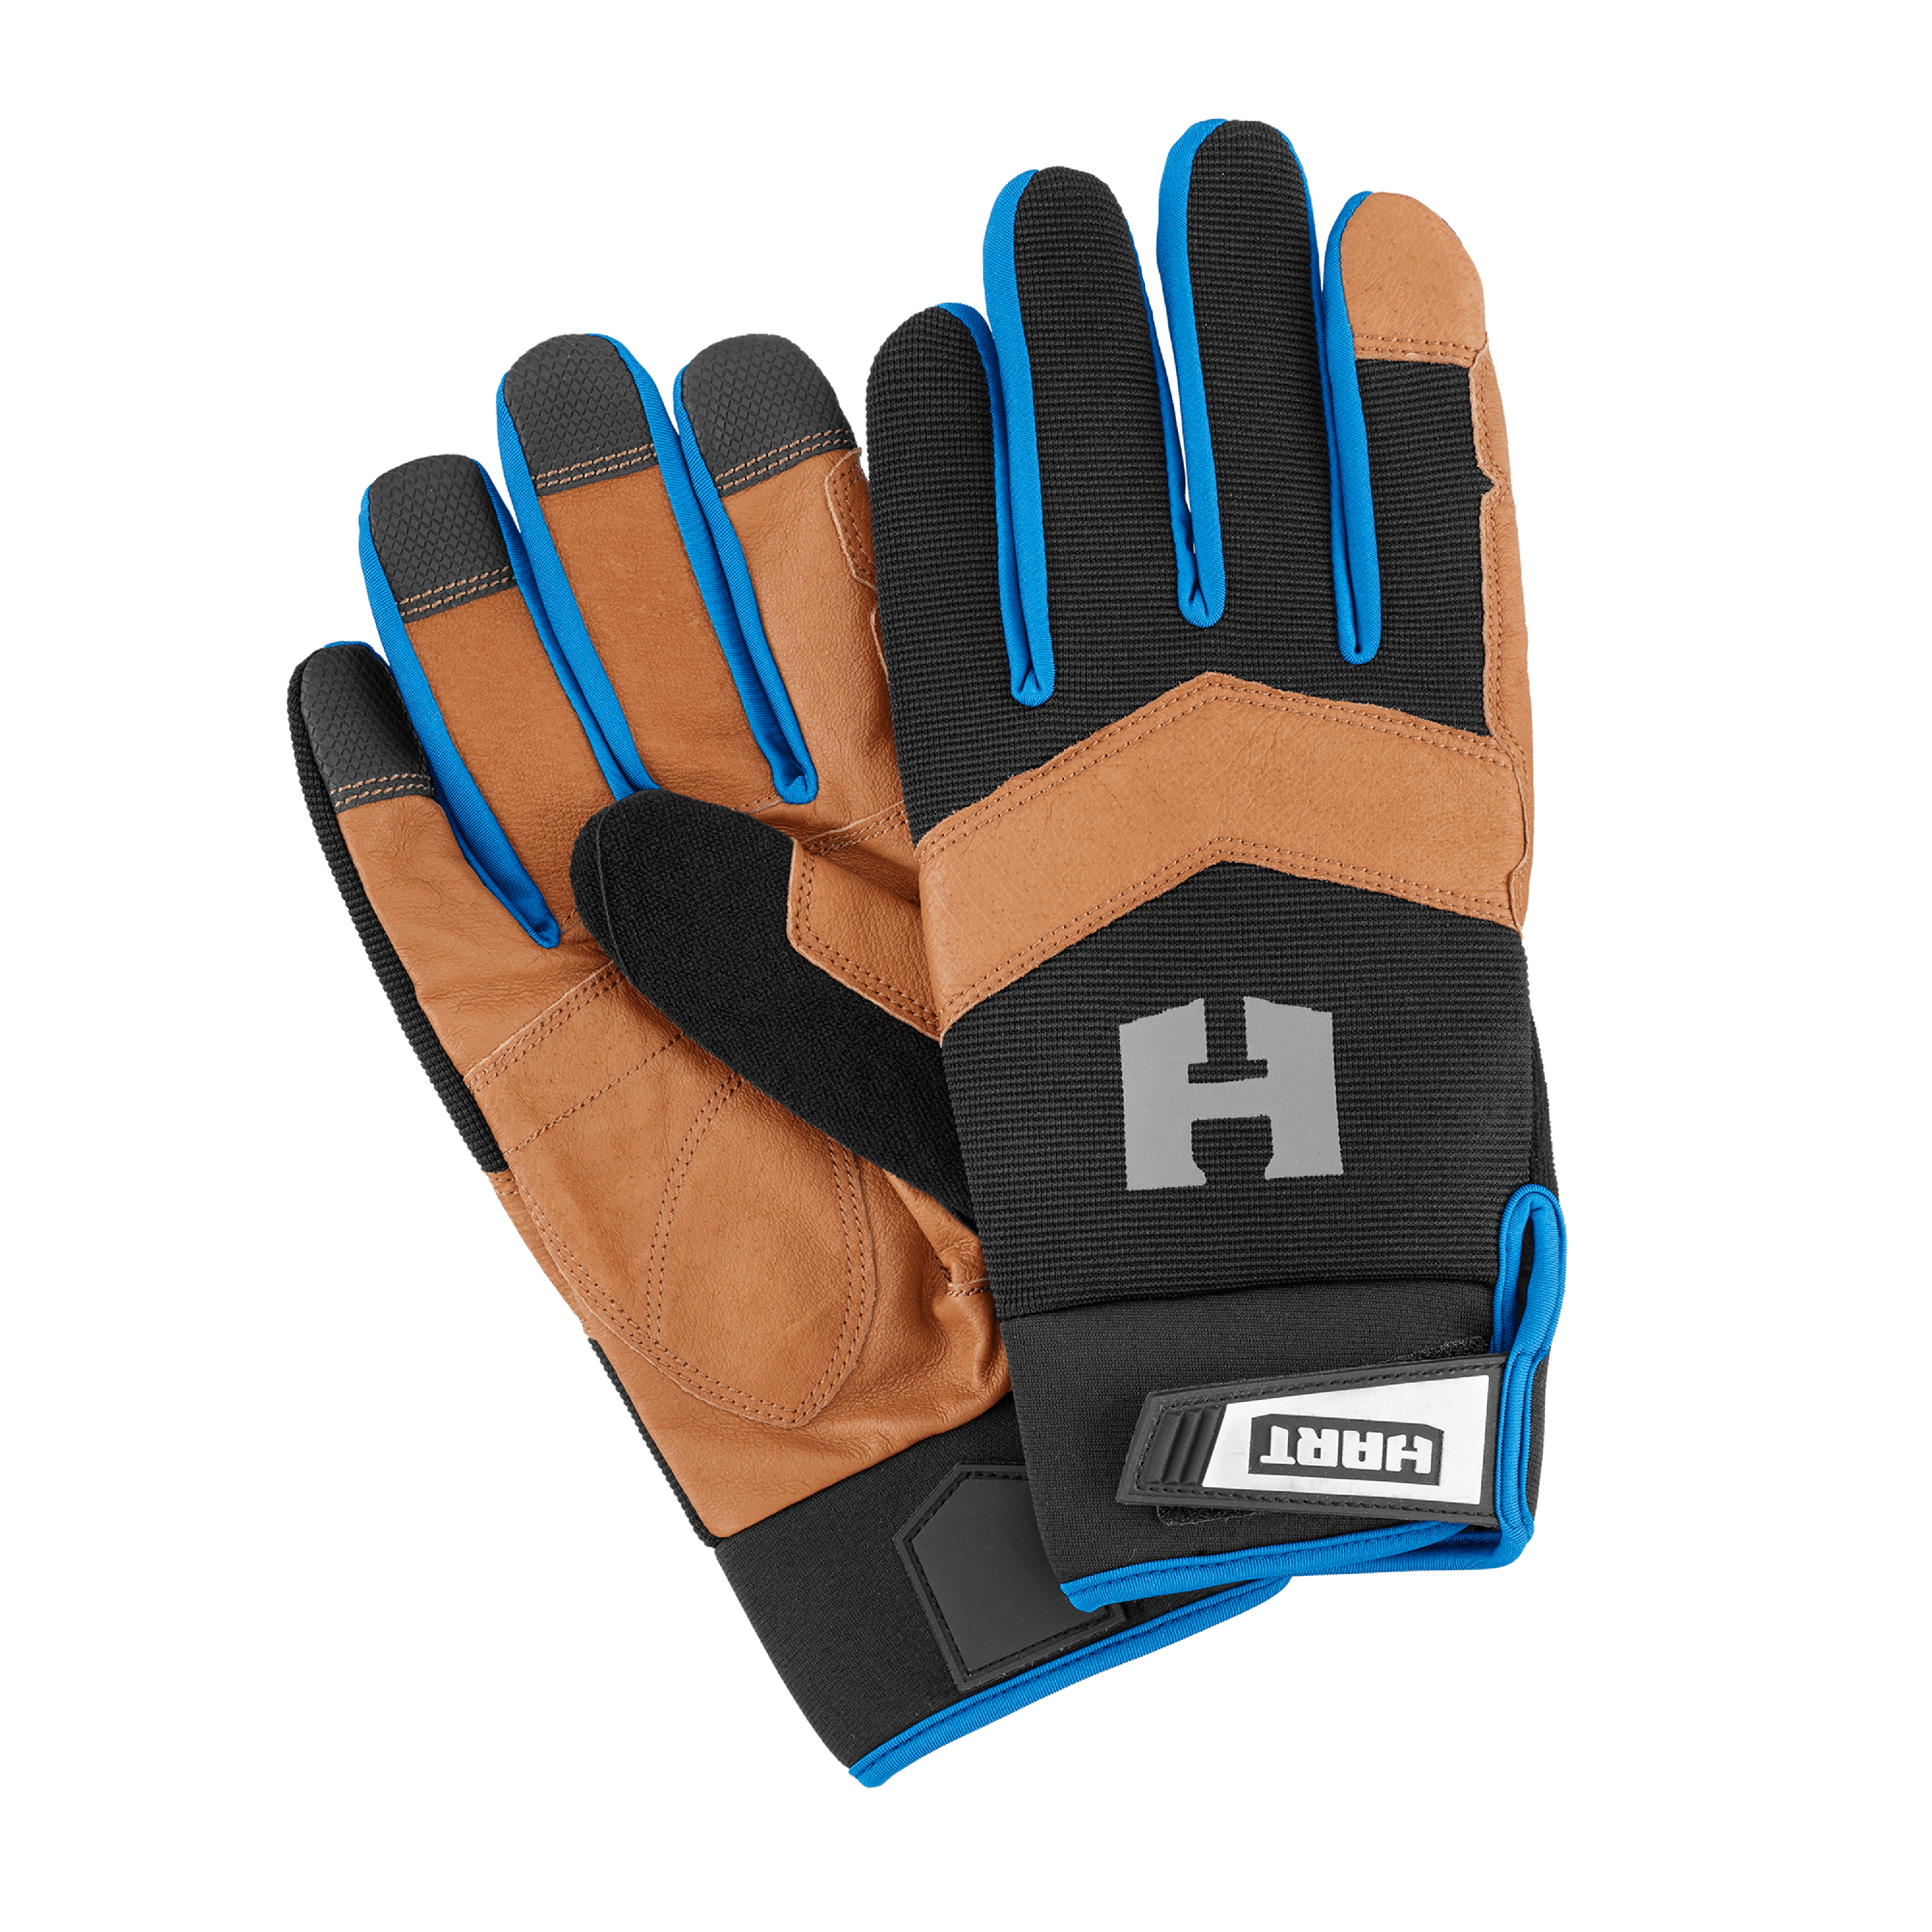 Hart Leather Palm Work Gloves, 5-Finger Touchscreen Capable, Size Large Safety Workwear Gloves, Size: One Size